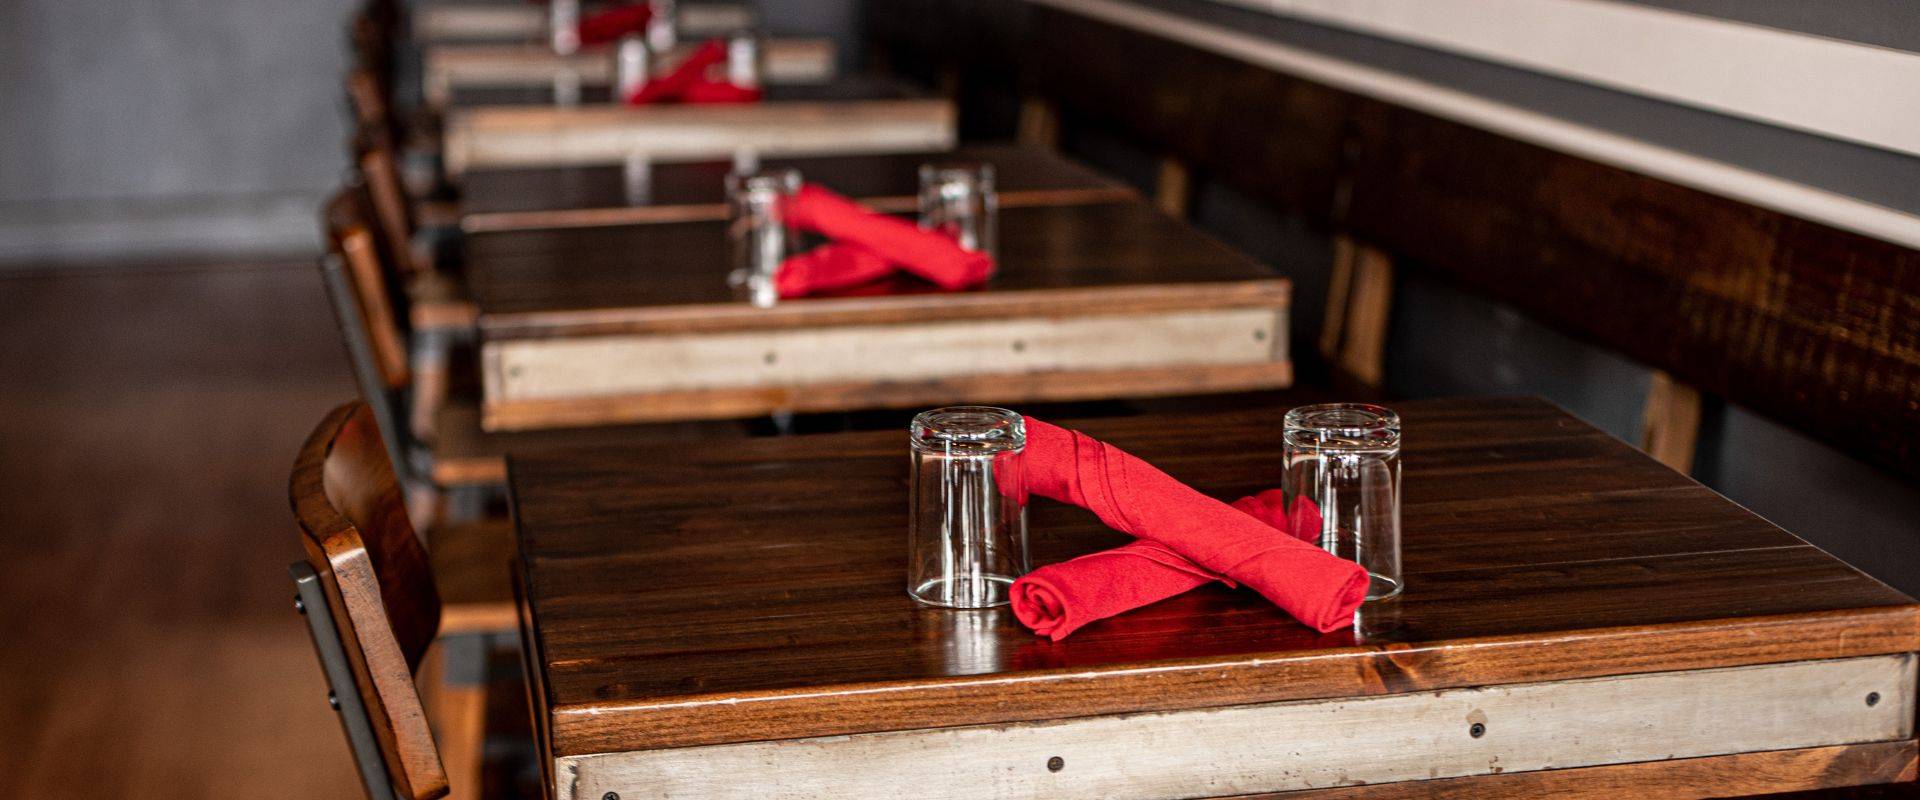 Red Cork Bistro offers an intimate dining experience, with tables, chairs, and benches, plus seating at the bar ... and red cloth napkins, of course.